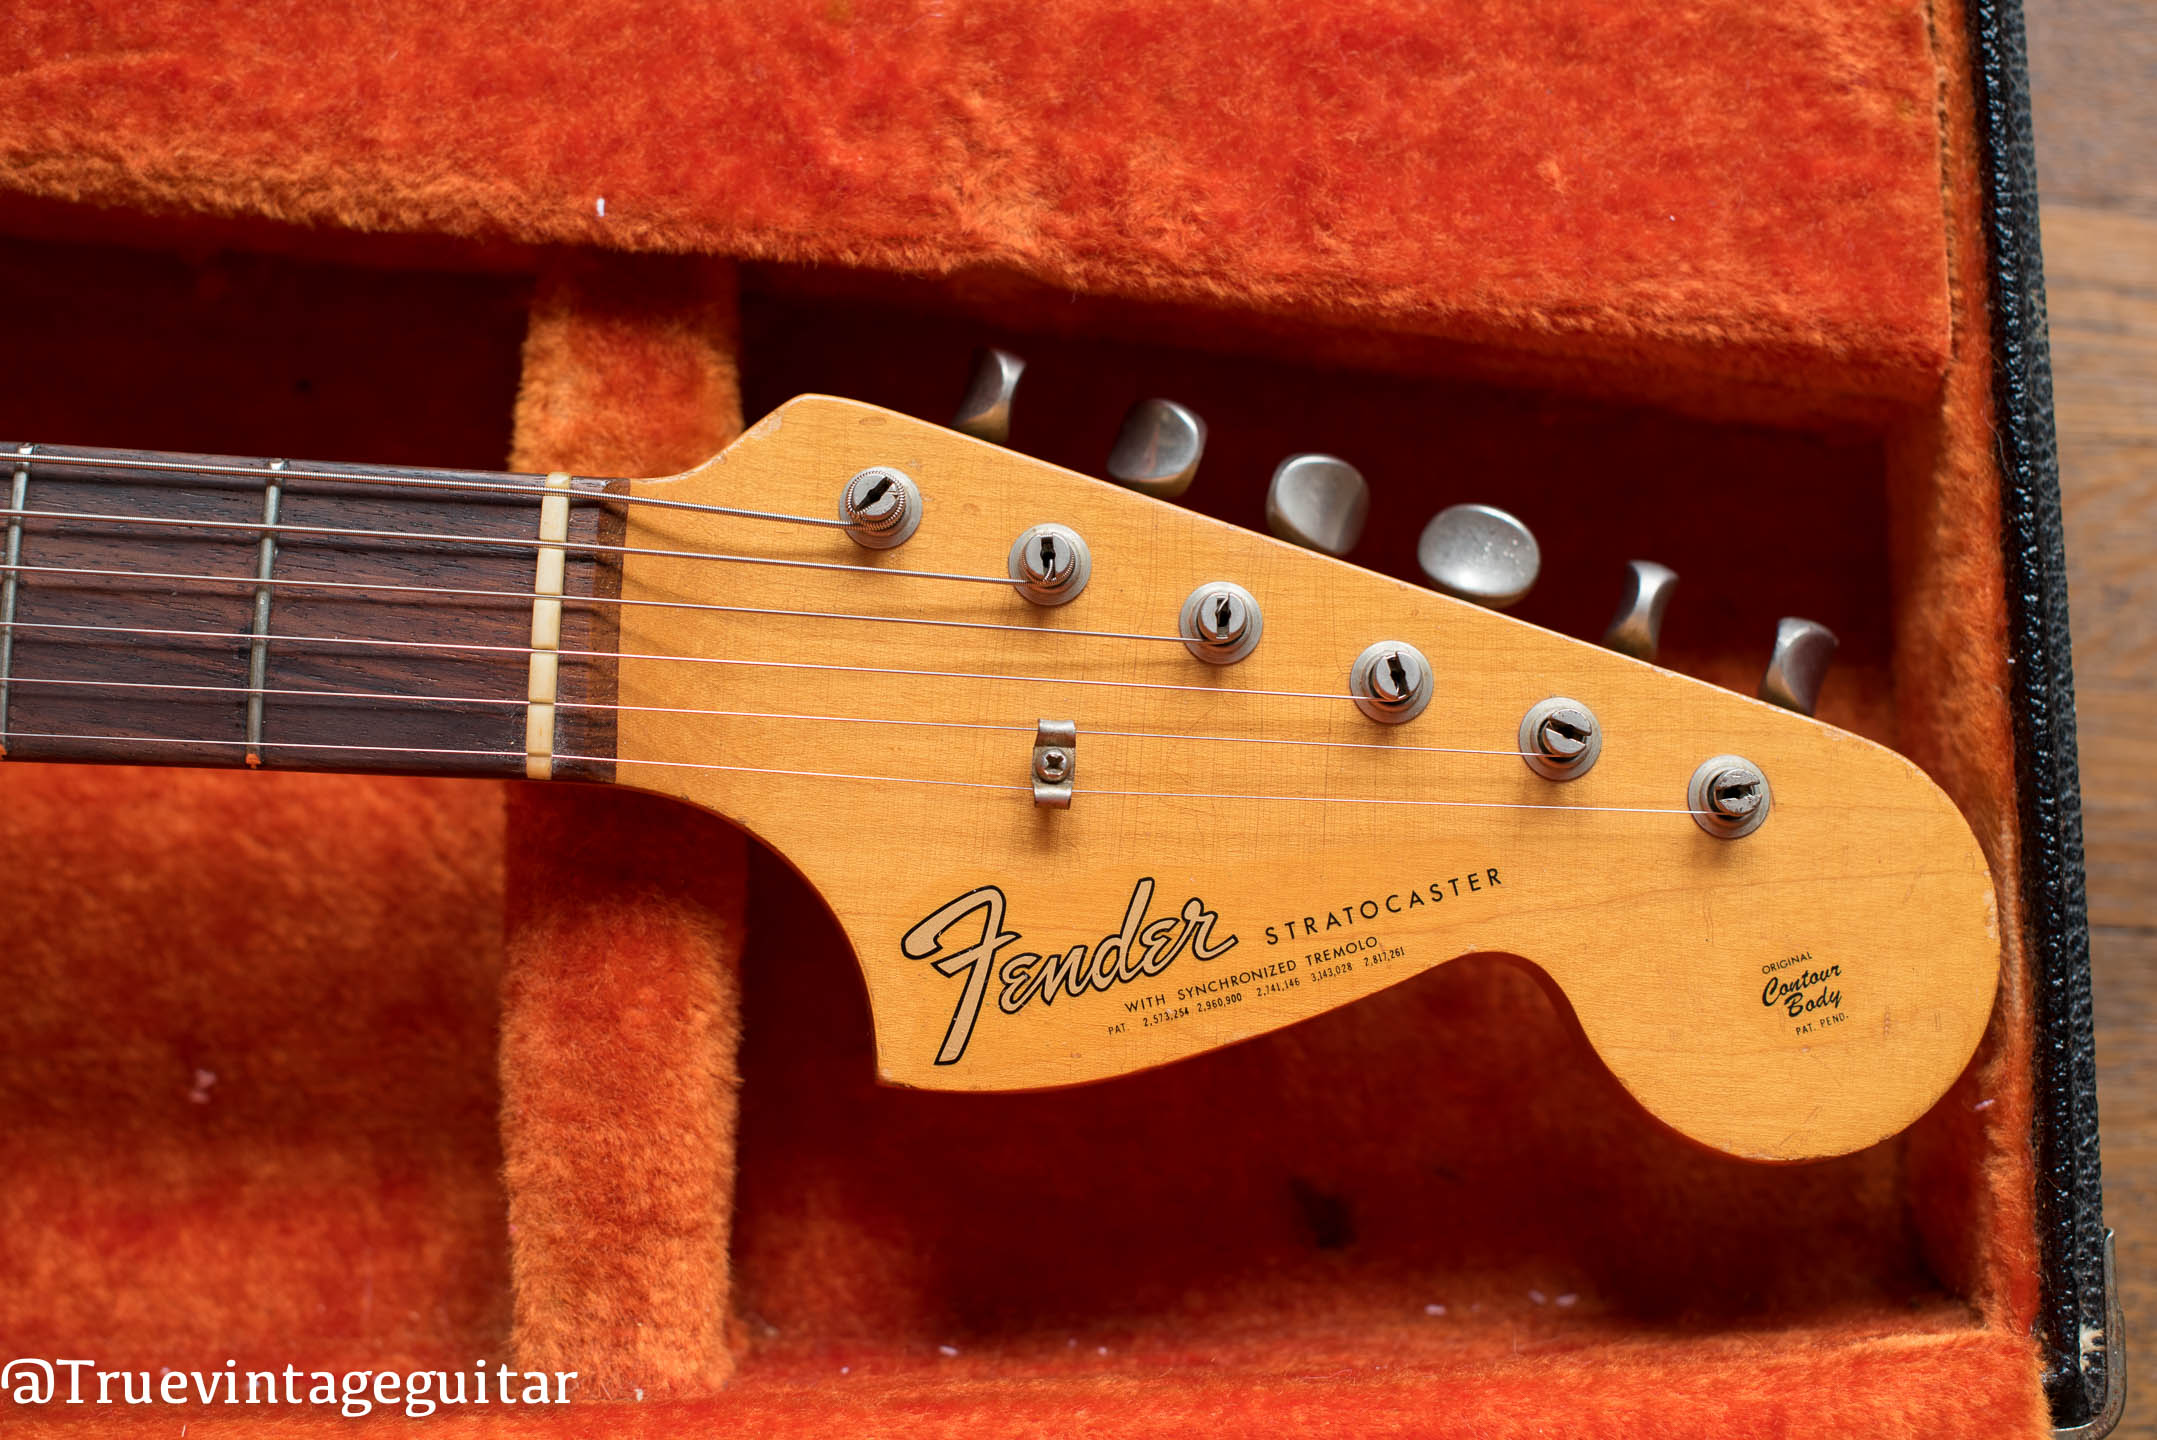 How to date a Fender Stratocaster with serial numbers, ink stamp dates, potentiometer codes, and features from a Fender guitar expert.